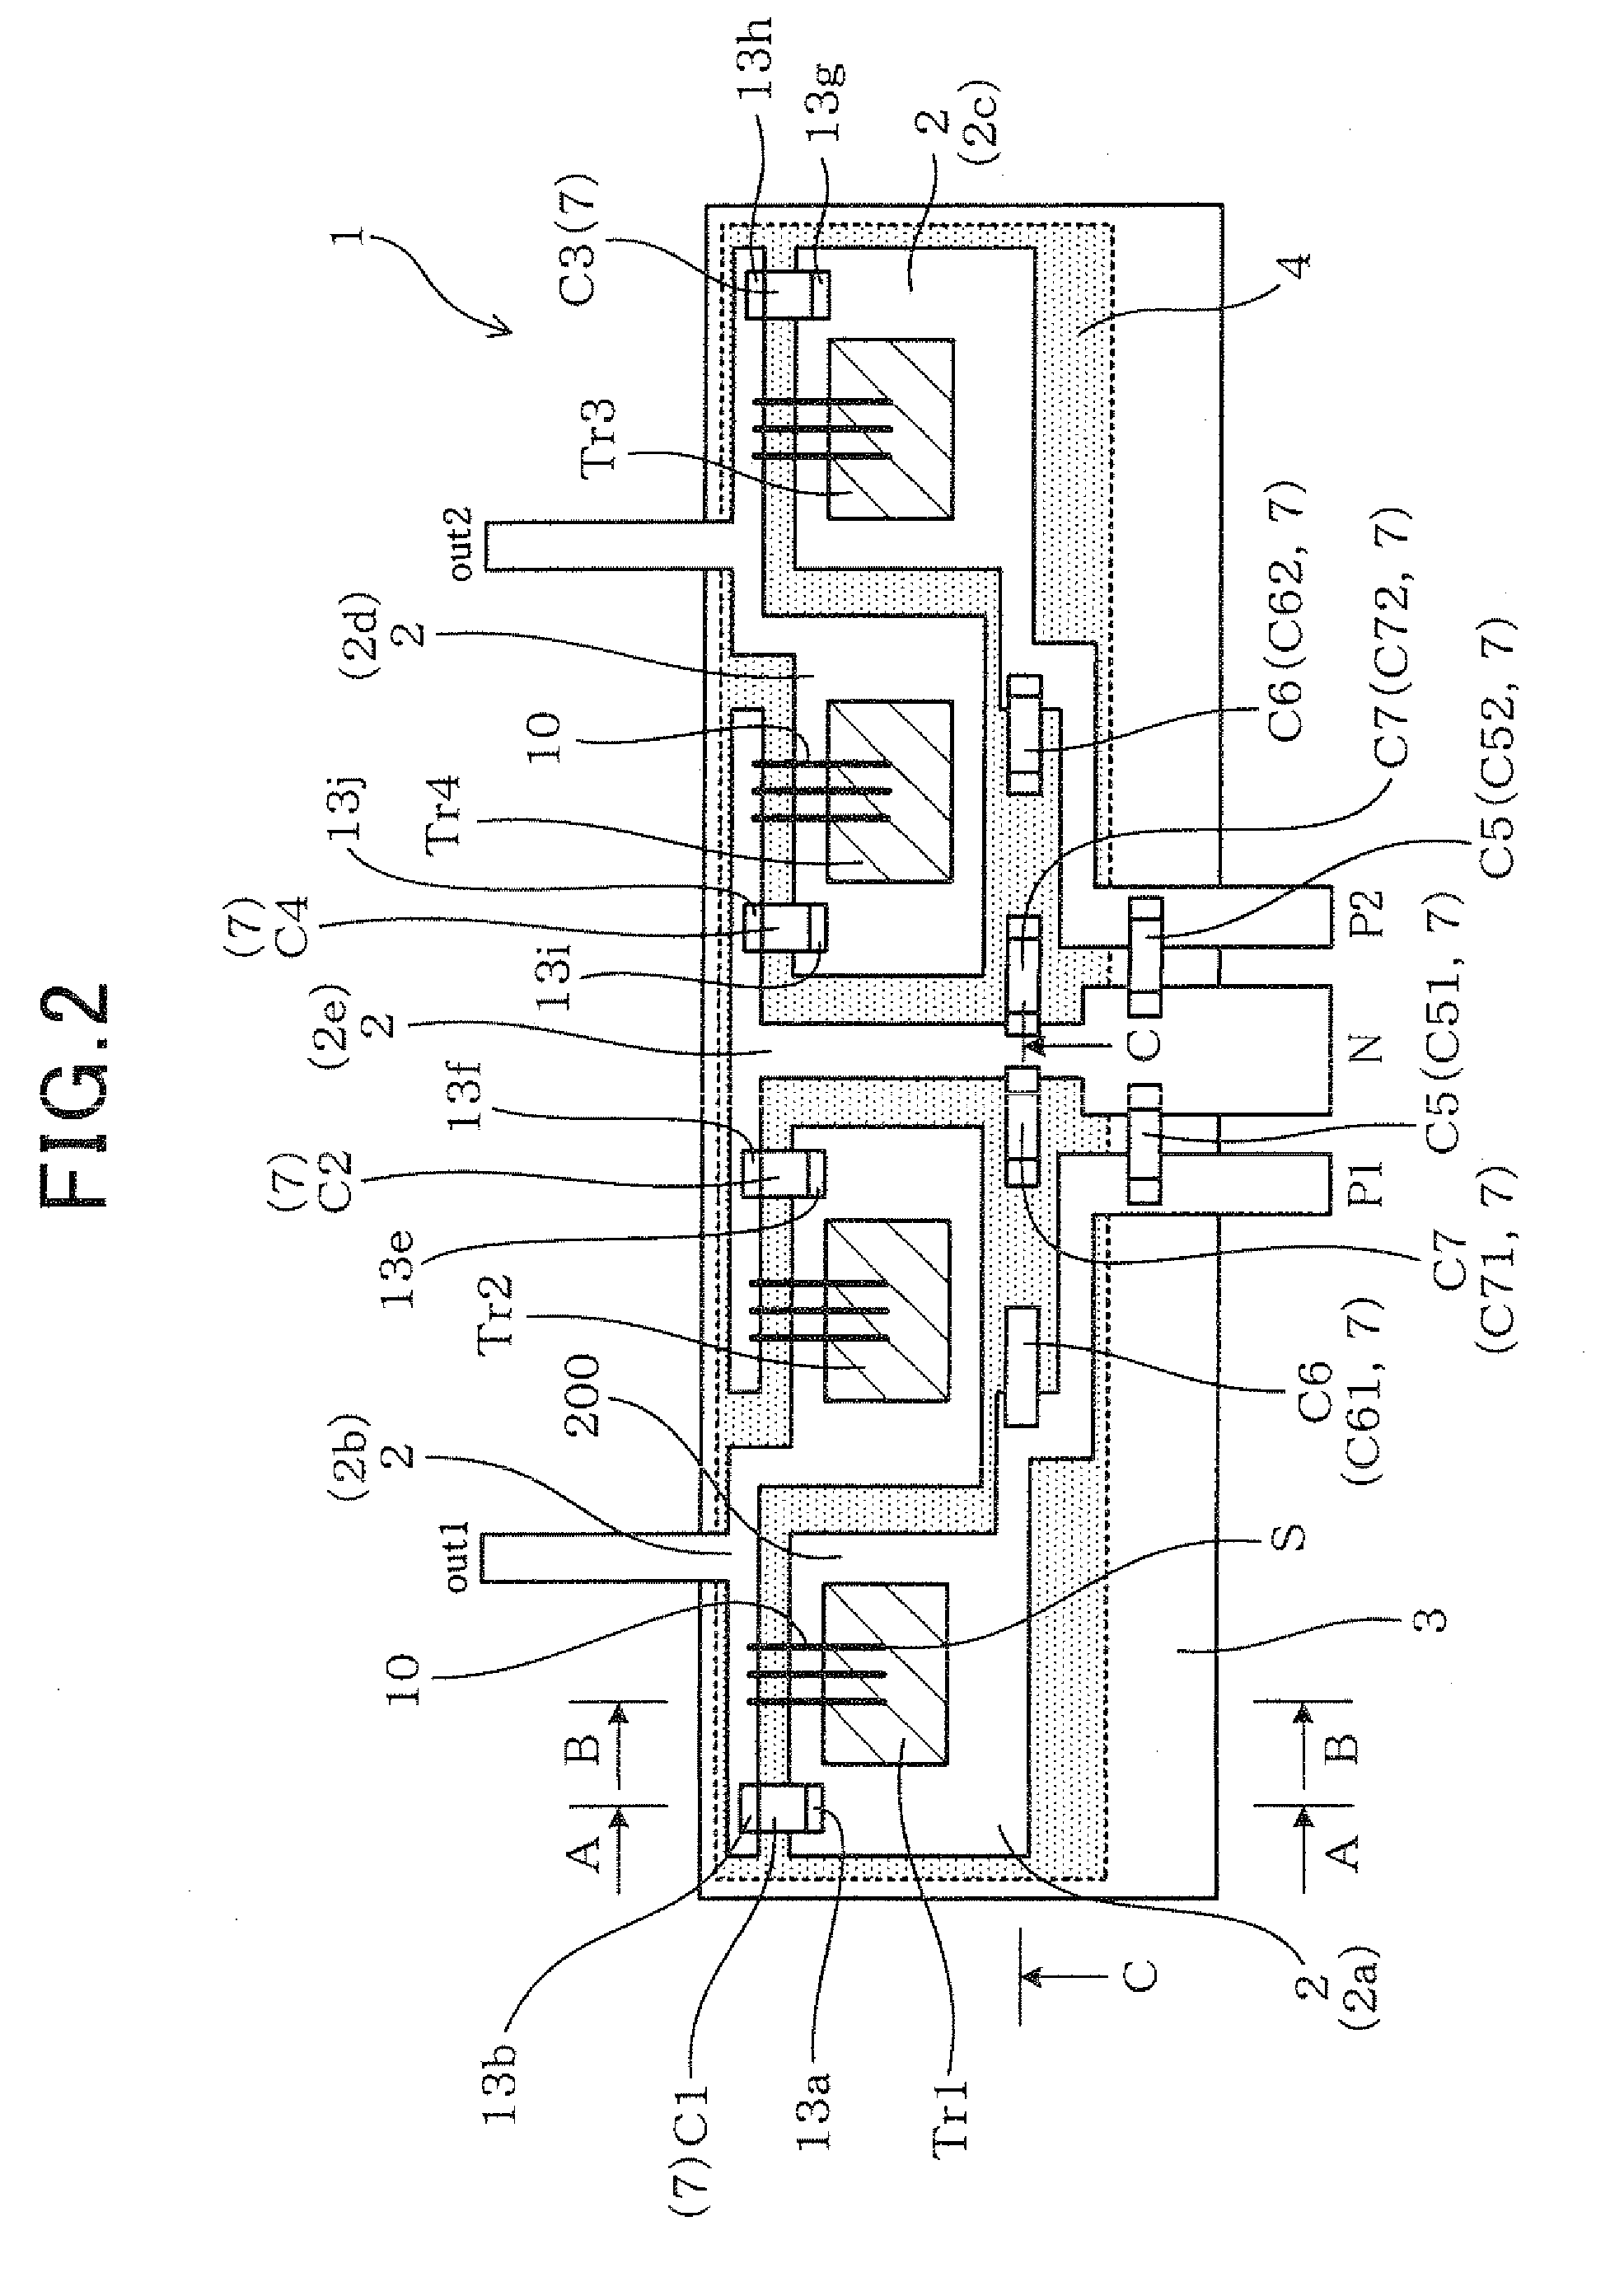 Semiconductor module with electrical switching elements